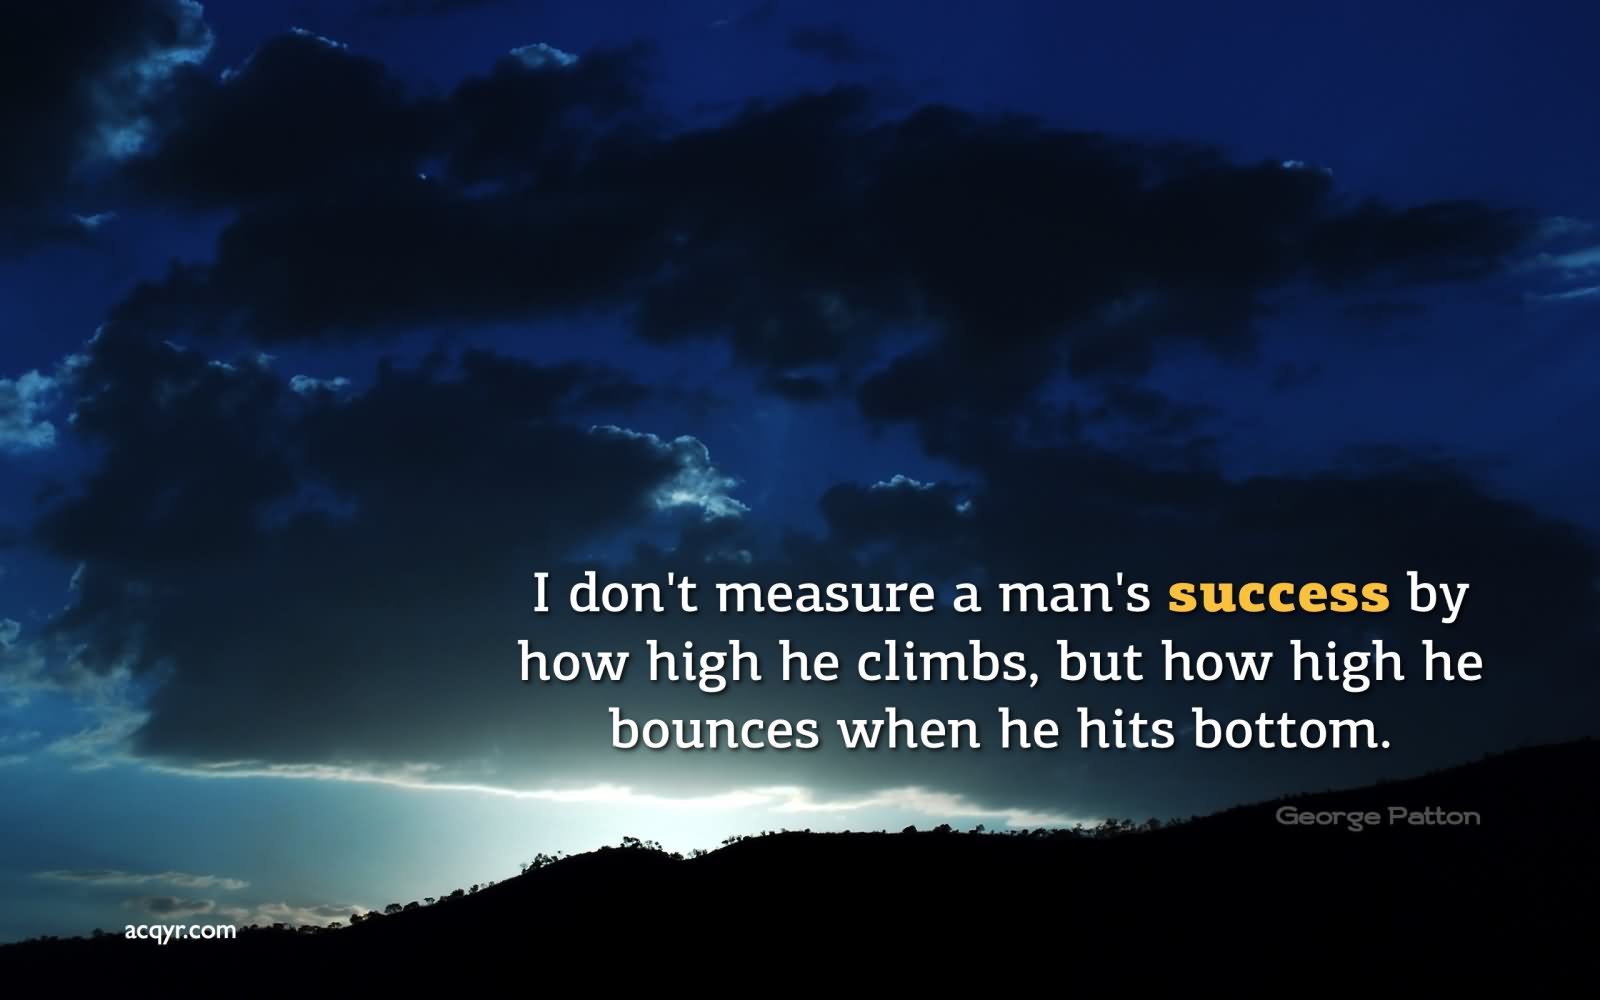 I don’t measure a man’s success by how high he climbs but how high he bounces when he hits bottom. .